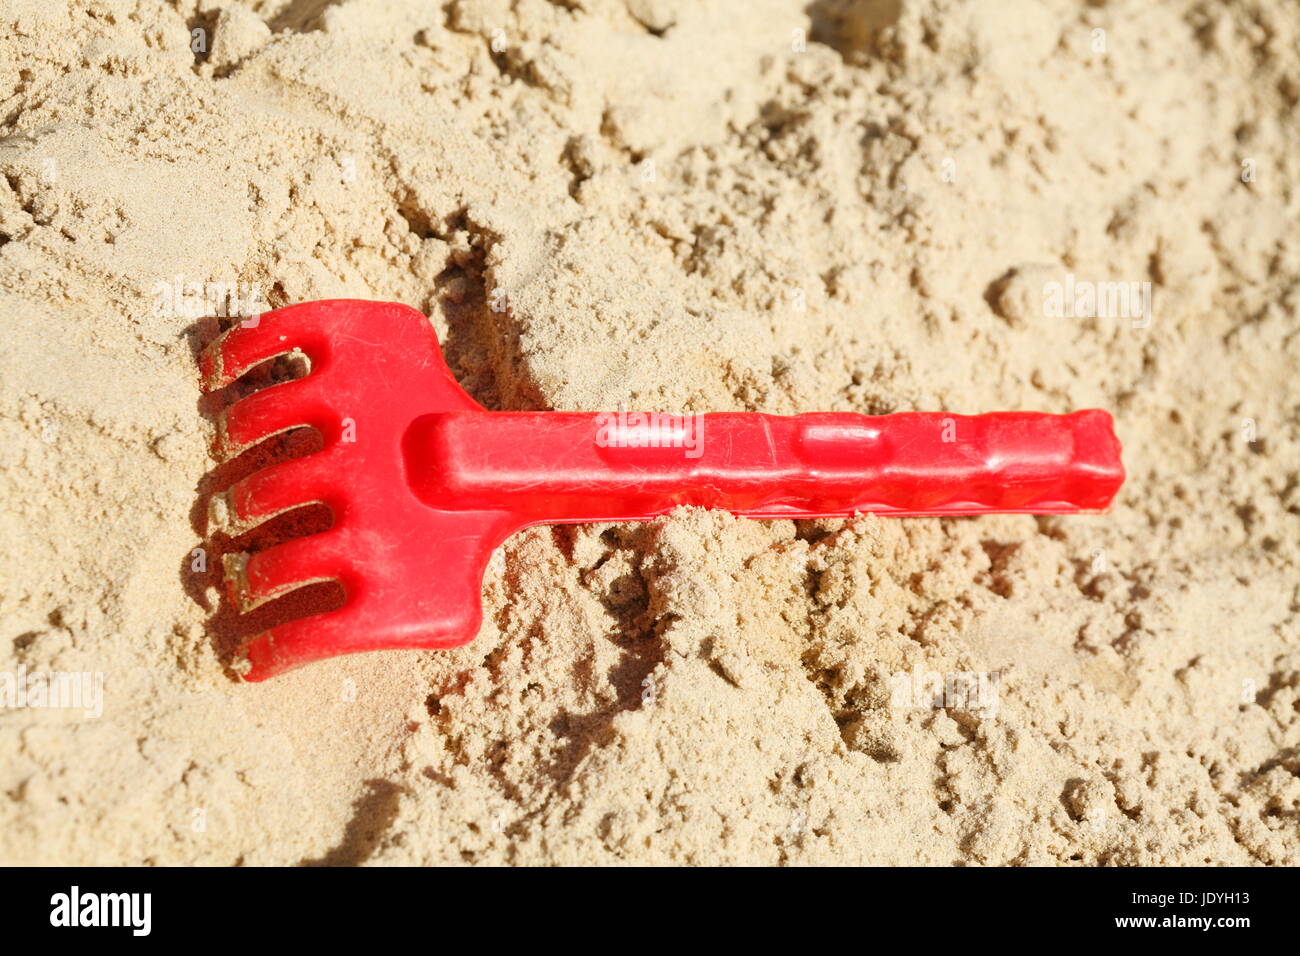 Plastic Toys in a Sandpit on a Playground for children Stock Photo